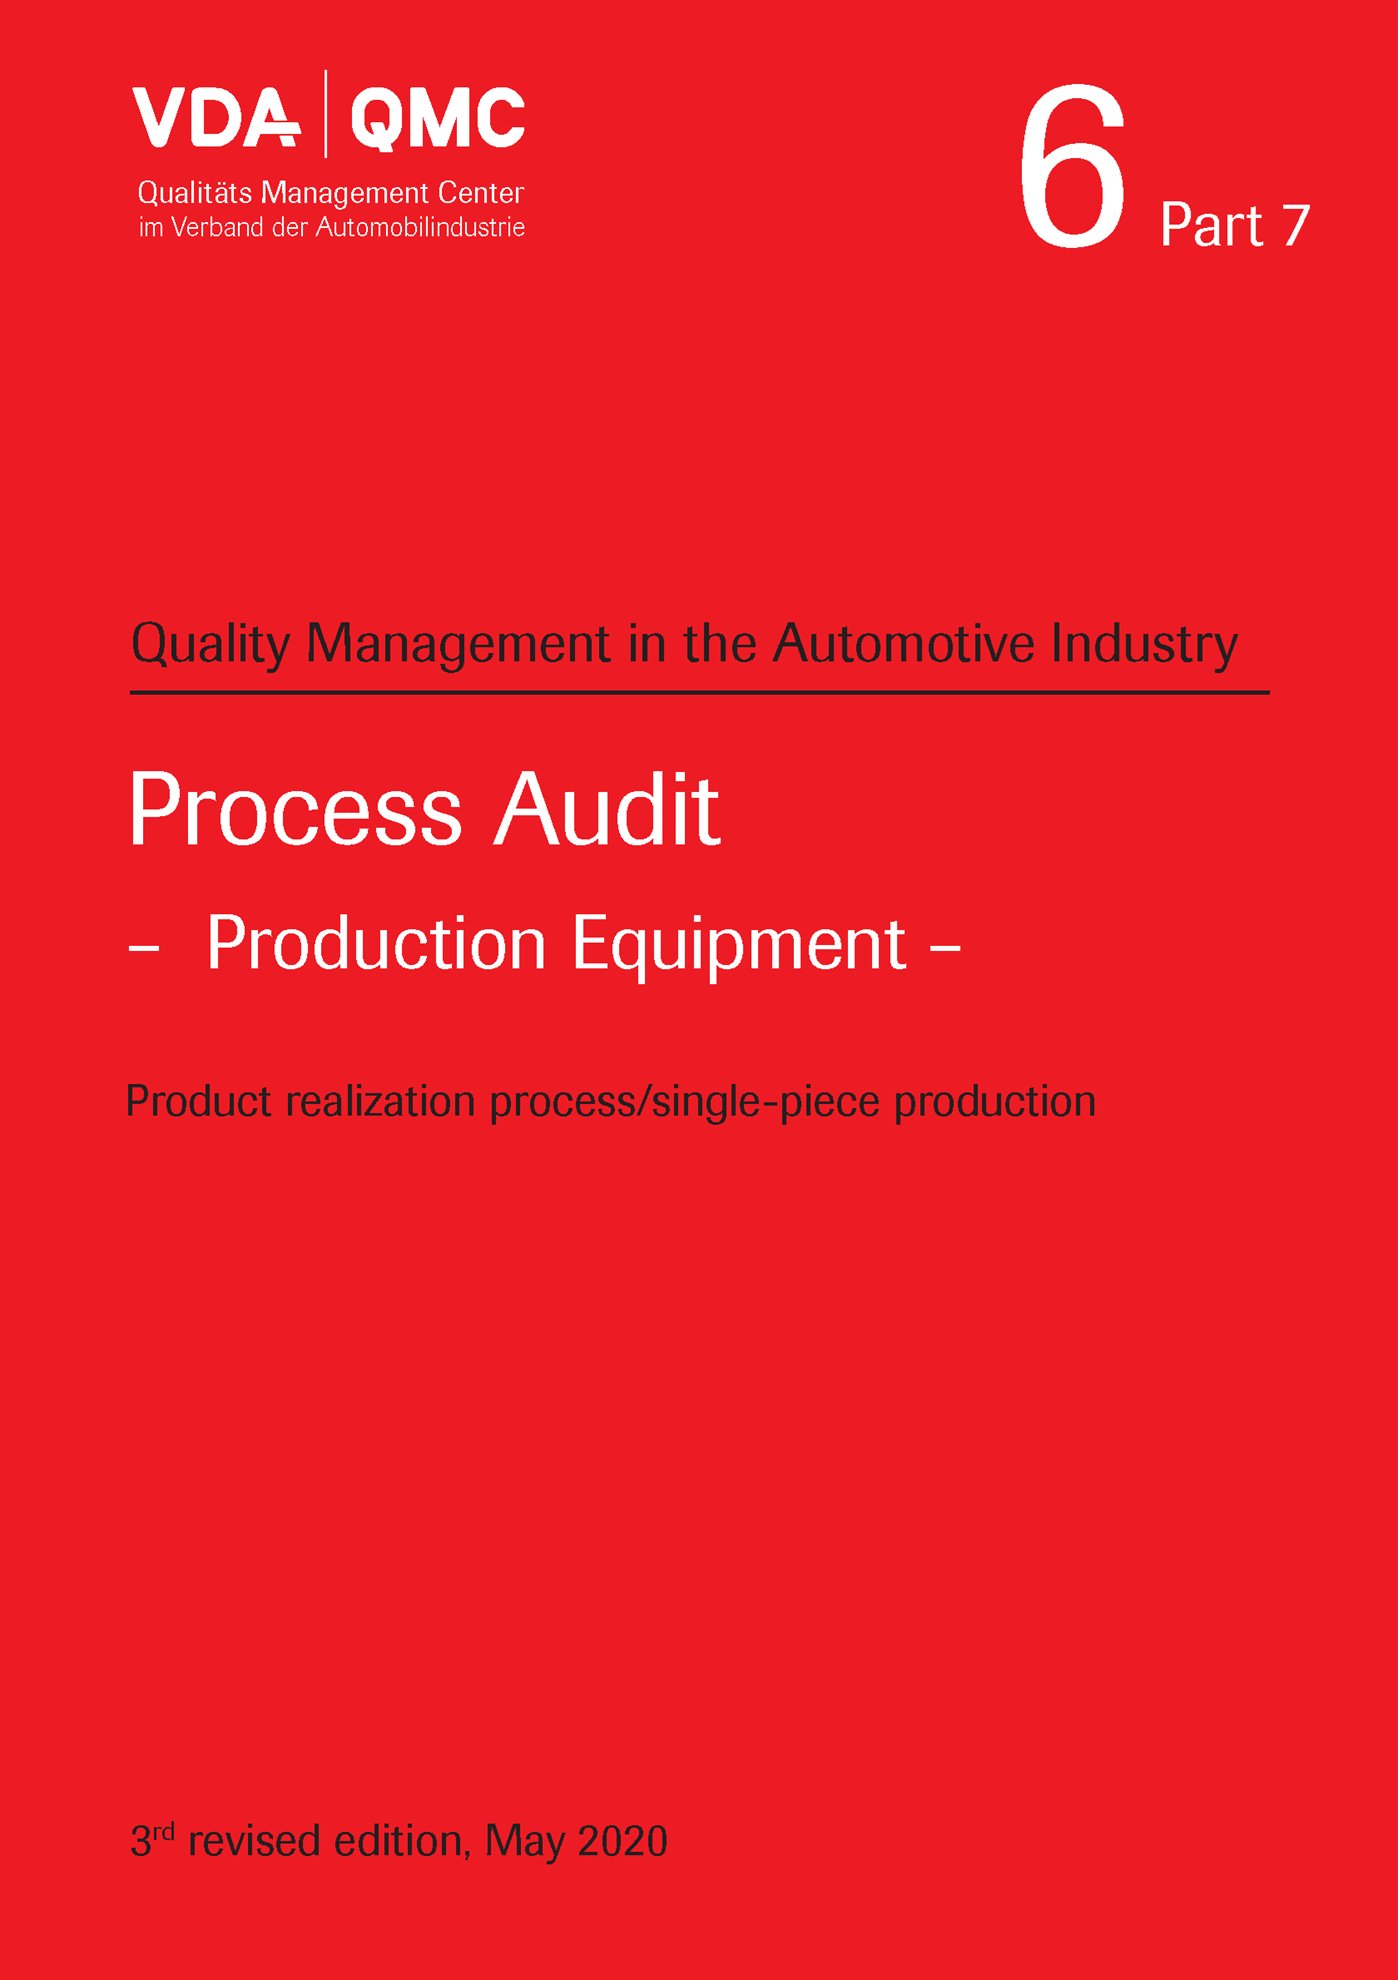 Náhľad  VDA Volume 6 Part 7, Process Audit - Production Equipment, 3rd, revised edition, May 2020 1.5.2020